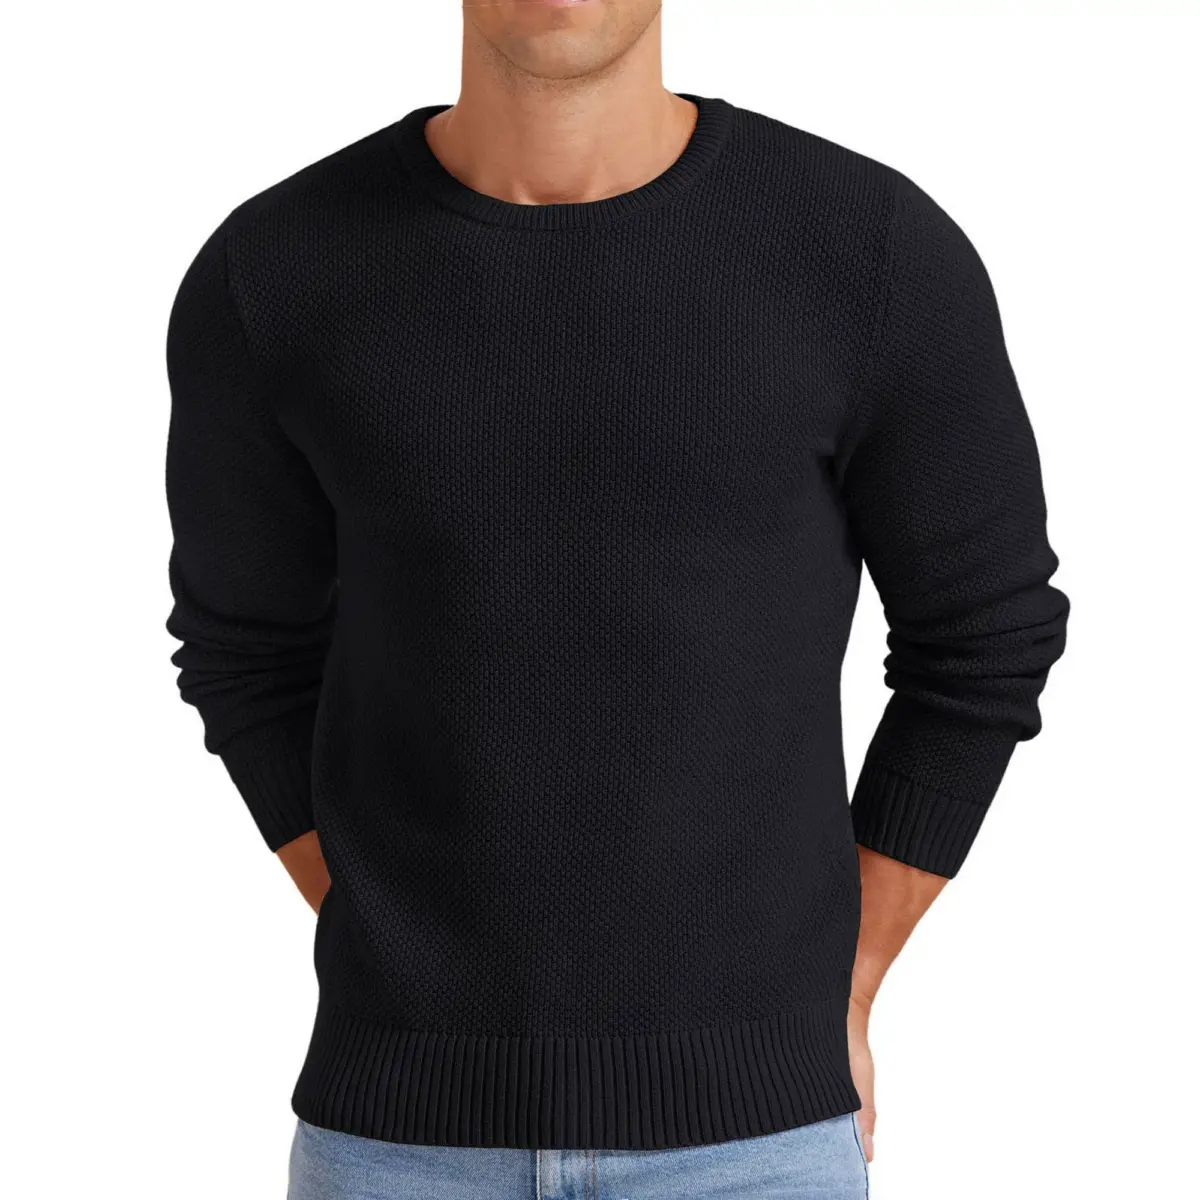 Ice glad Men’s Casual Crewneck Sweater Soft Knitwear with Lightweight Ribbed Edge Black